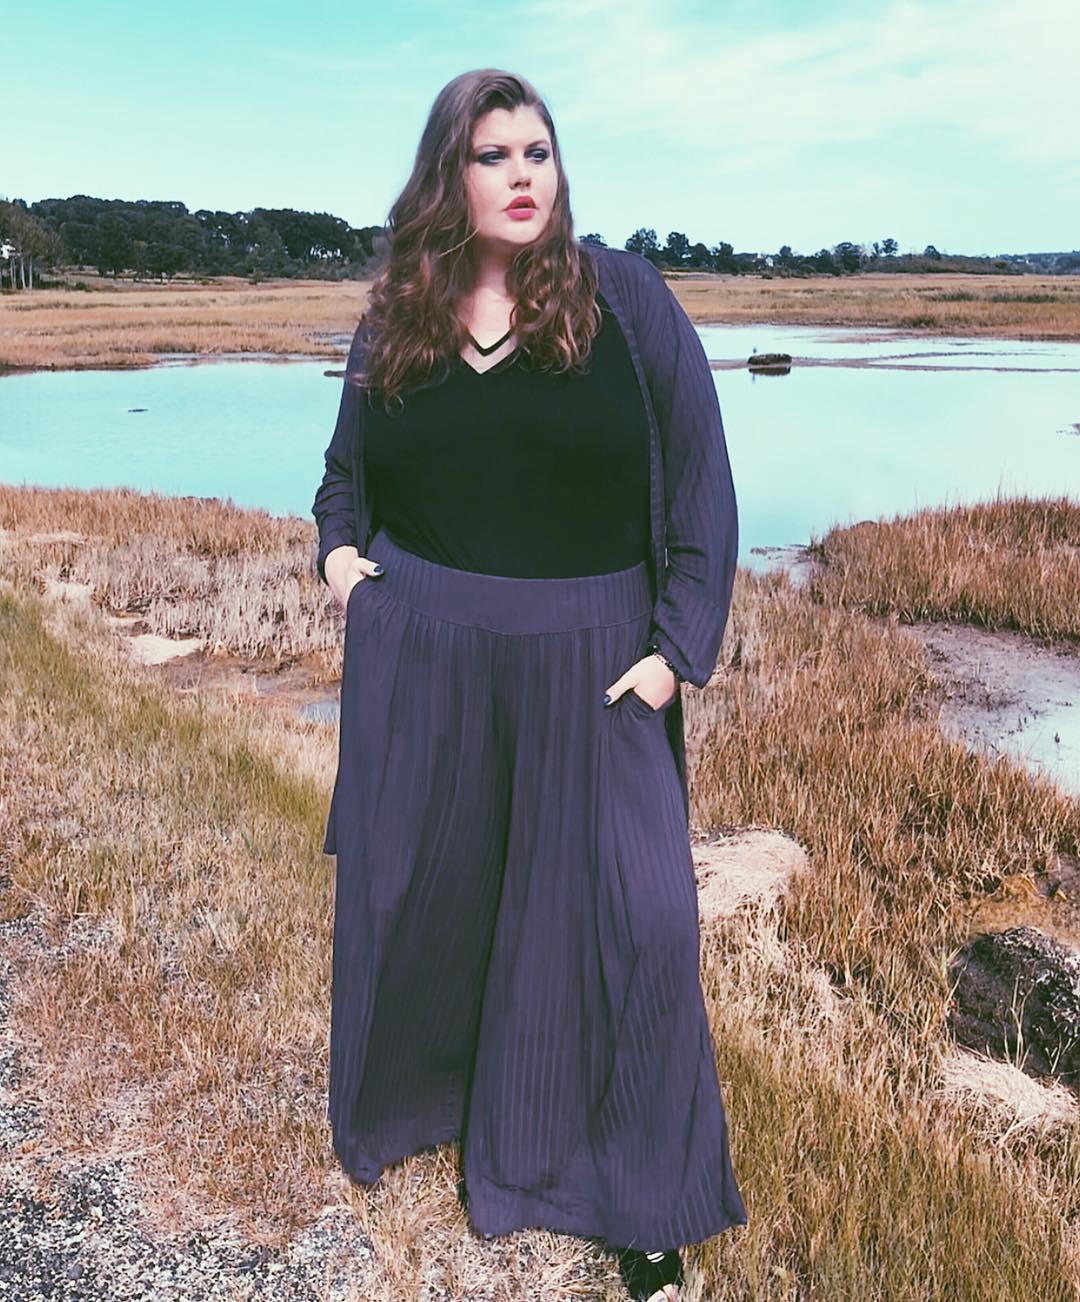 37 Funeral Outfit Ideas for Plus Size Women 2021